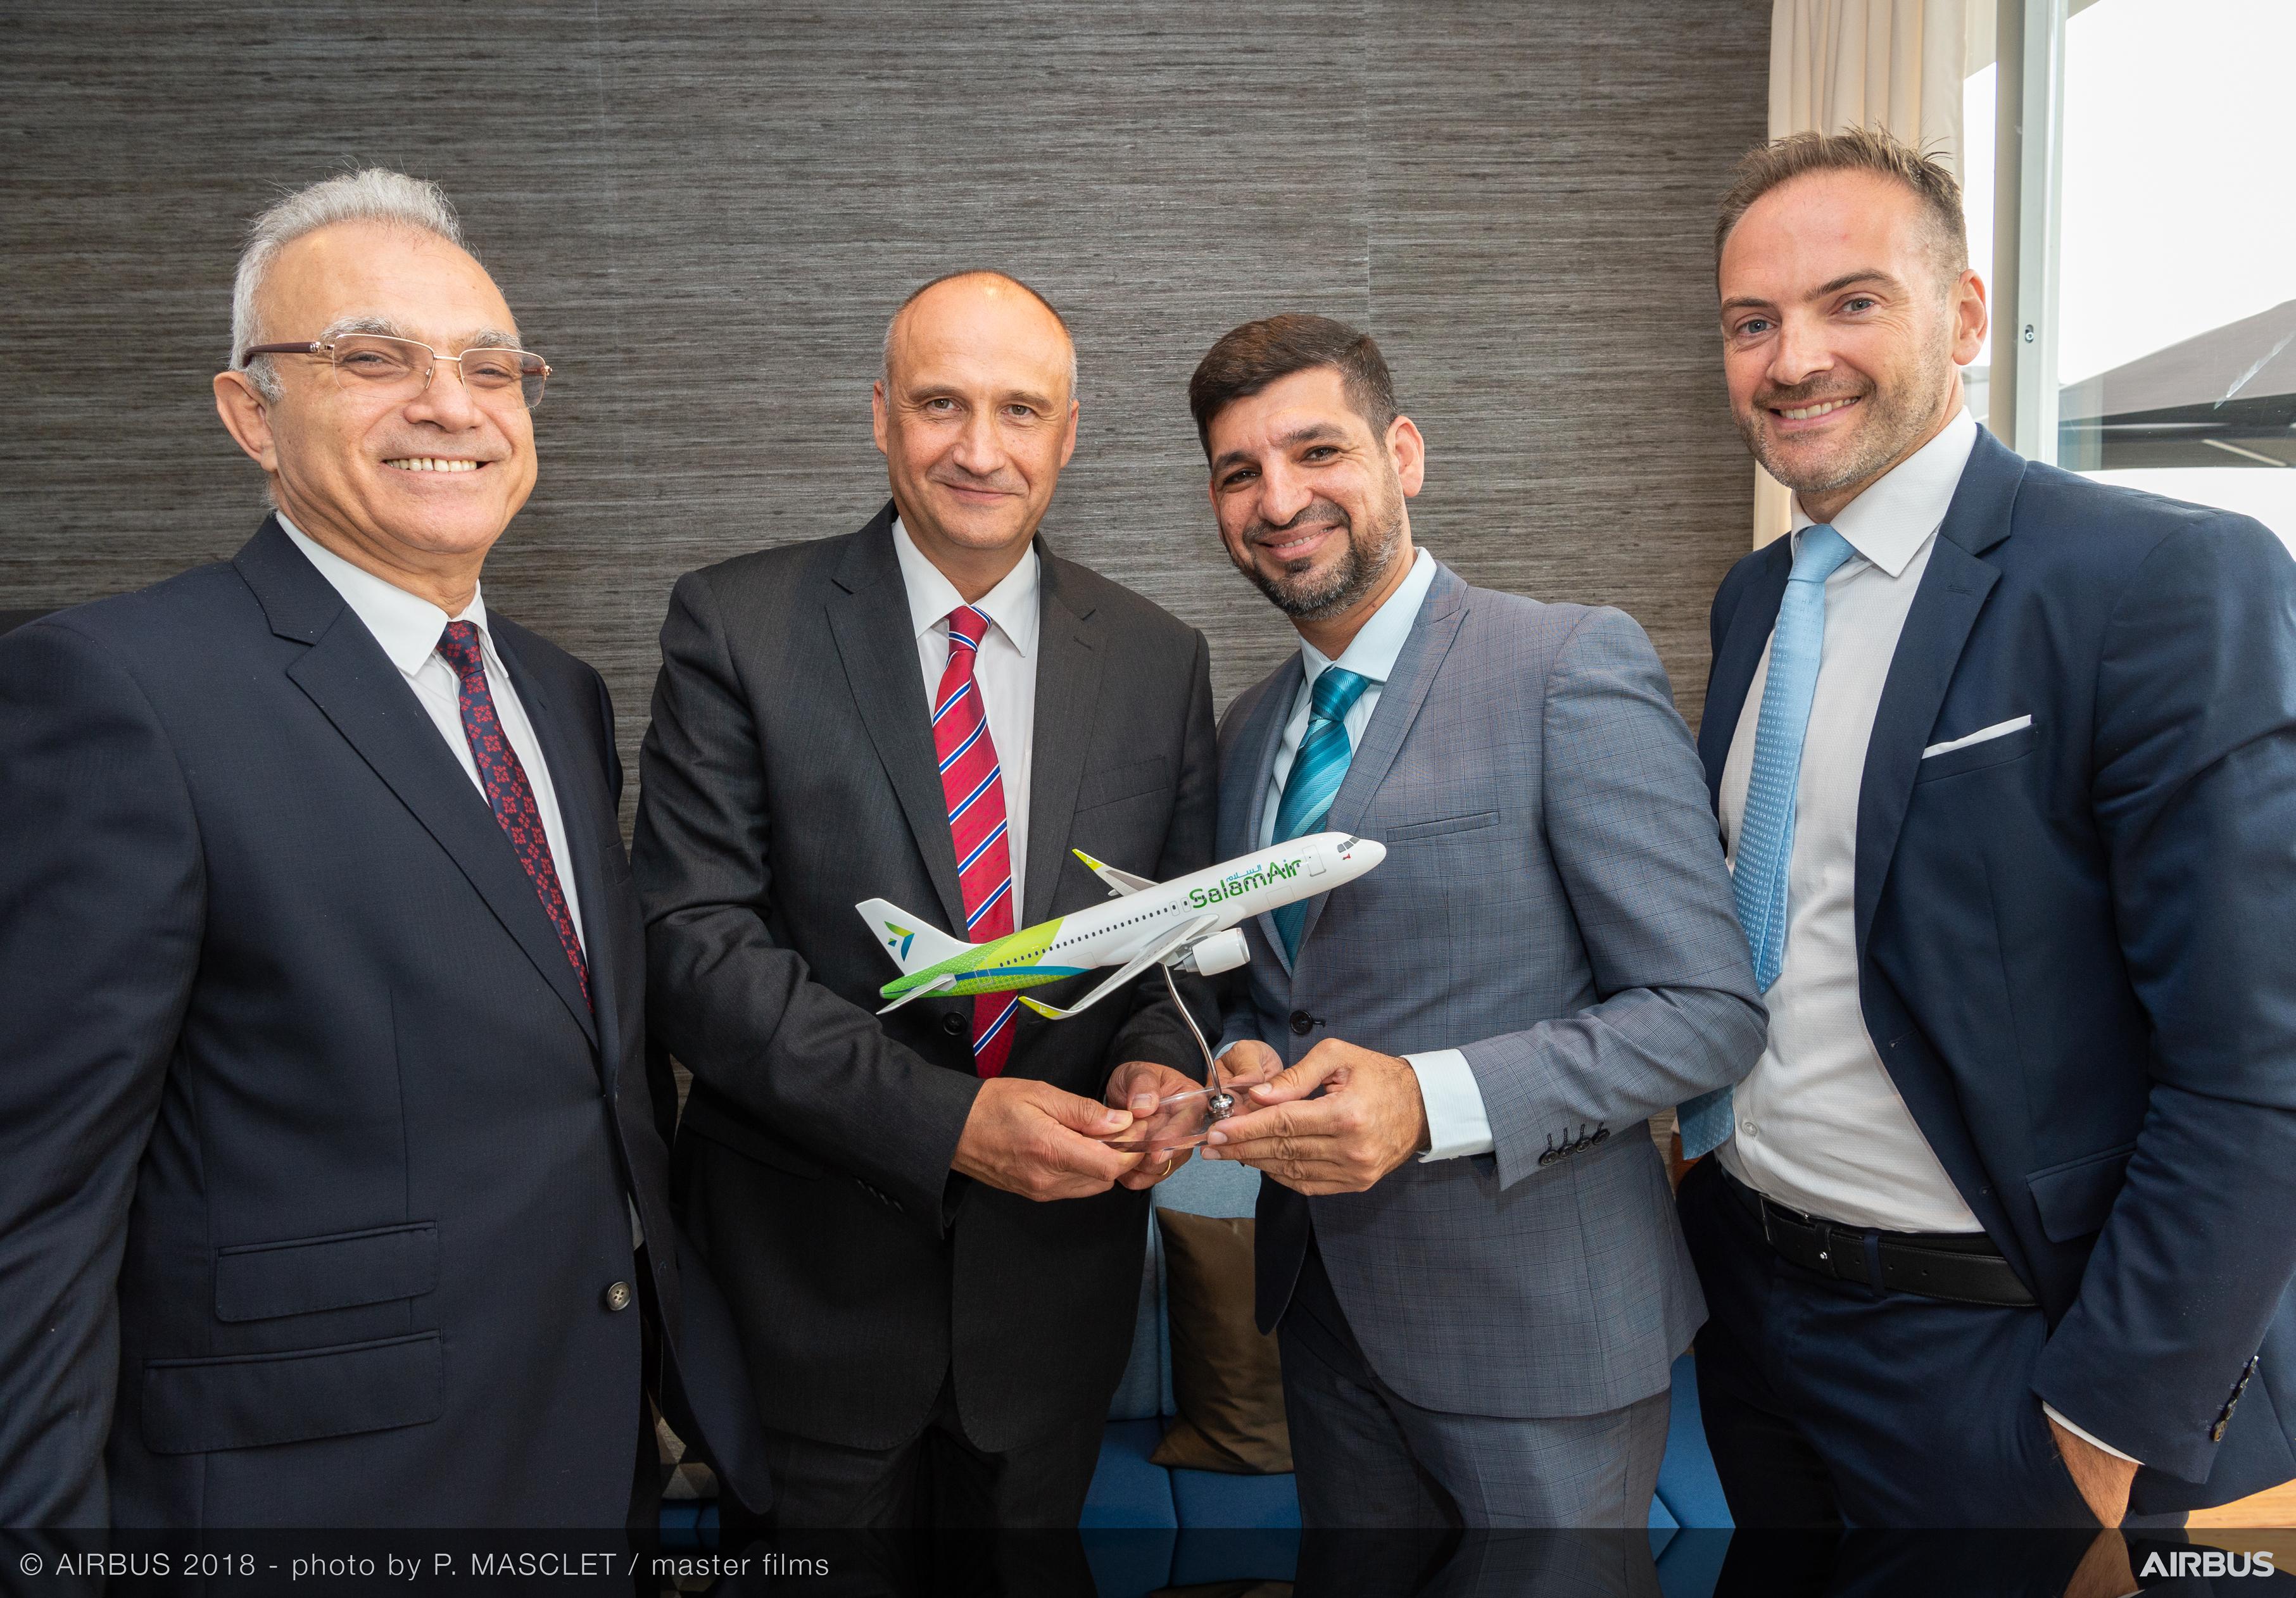 ​SalamAir to add more flights, launch new routes